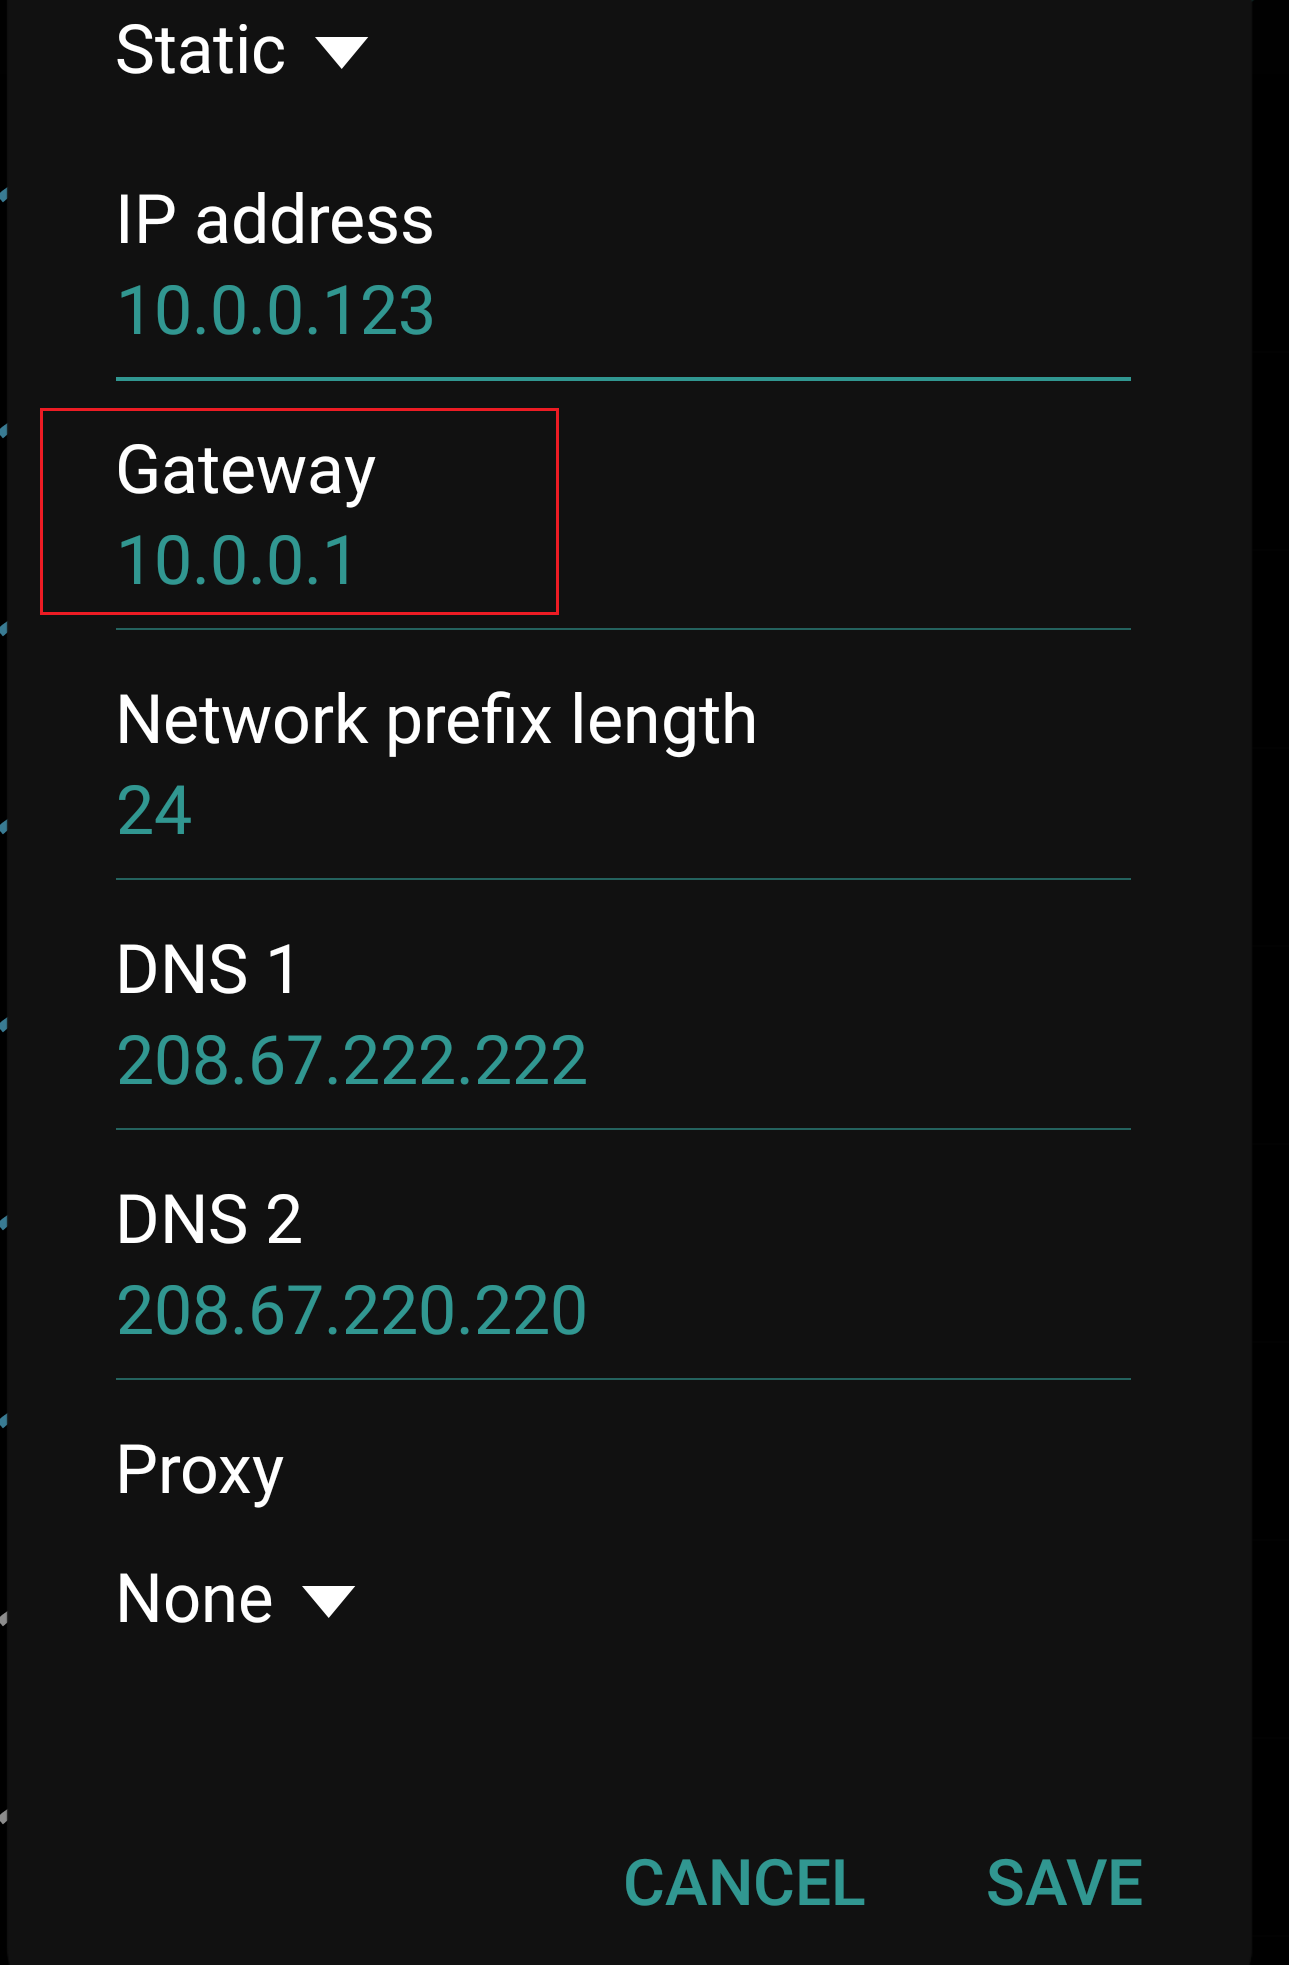 Gateway section on Android